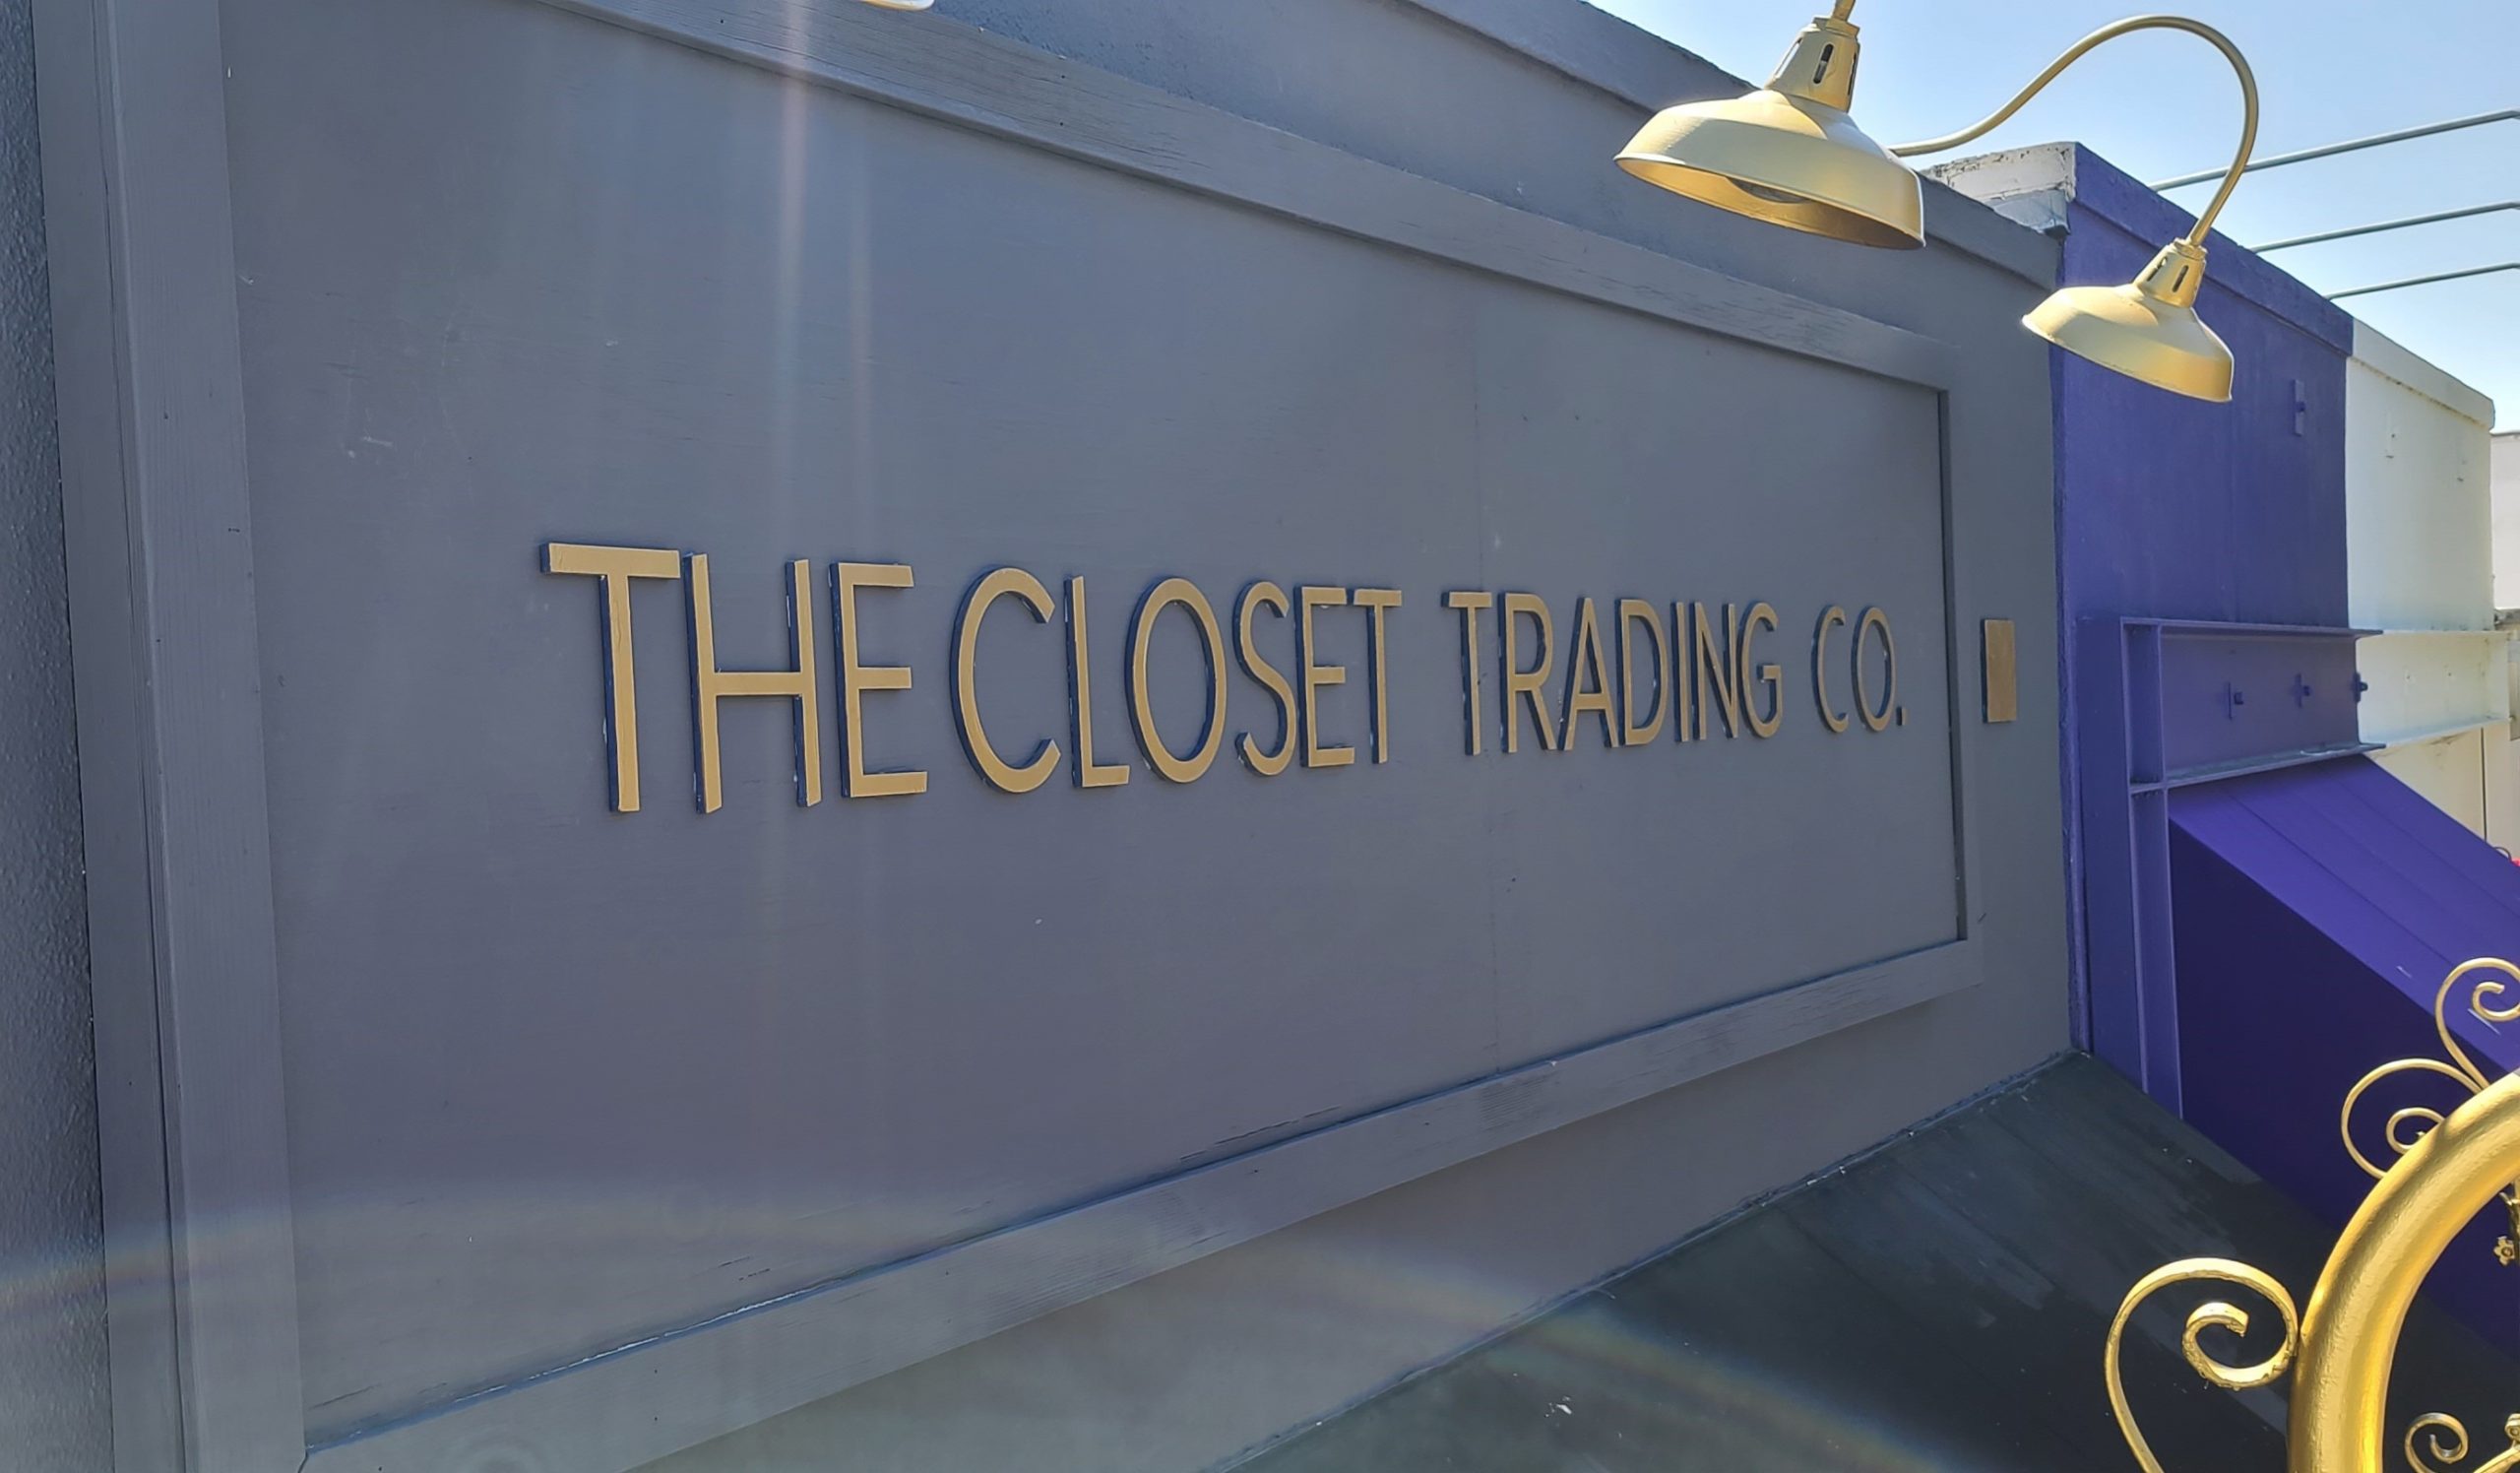 Dimensional letters make for great storefront signs such as this boutique sign we fabricated and installed for The Closet Trading Company's Santa Monica location.